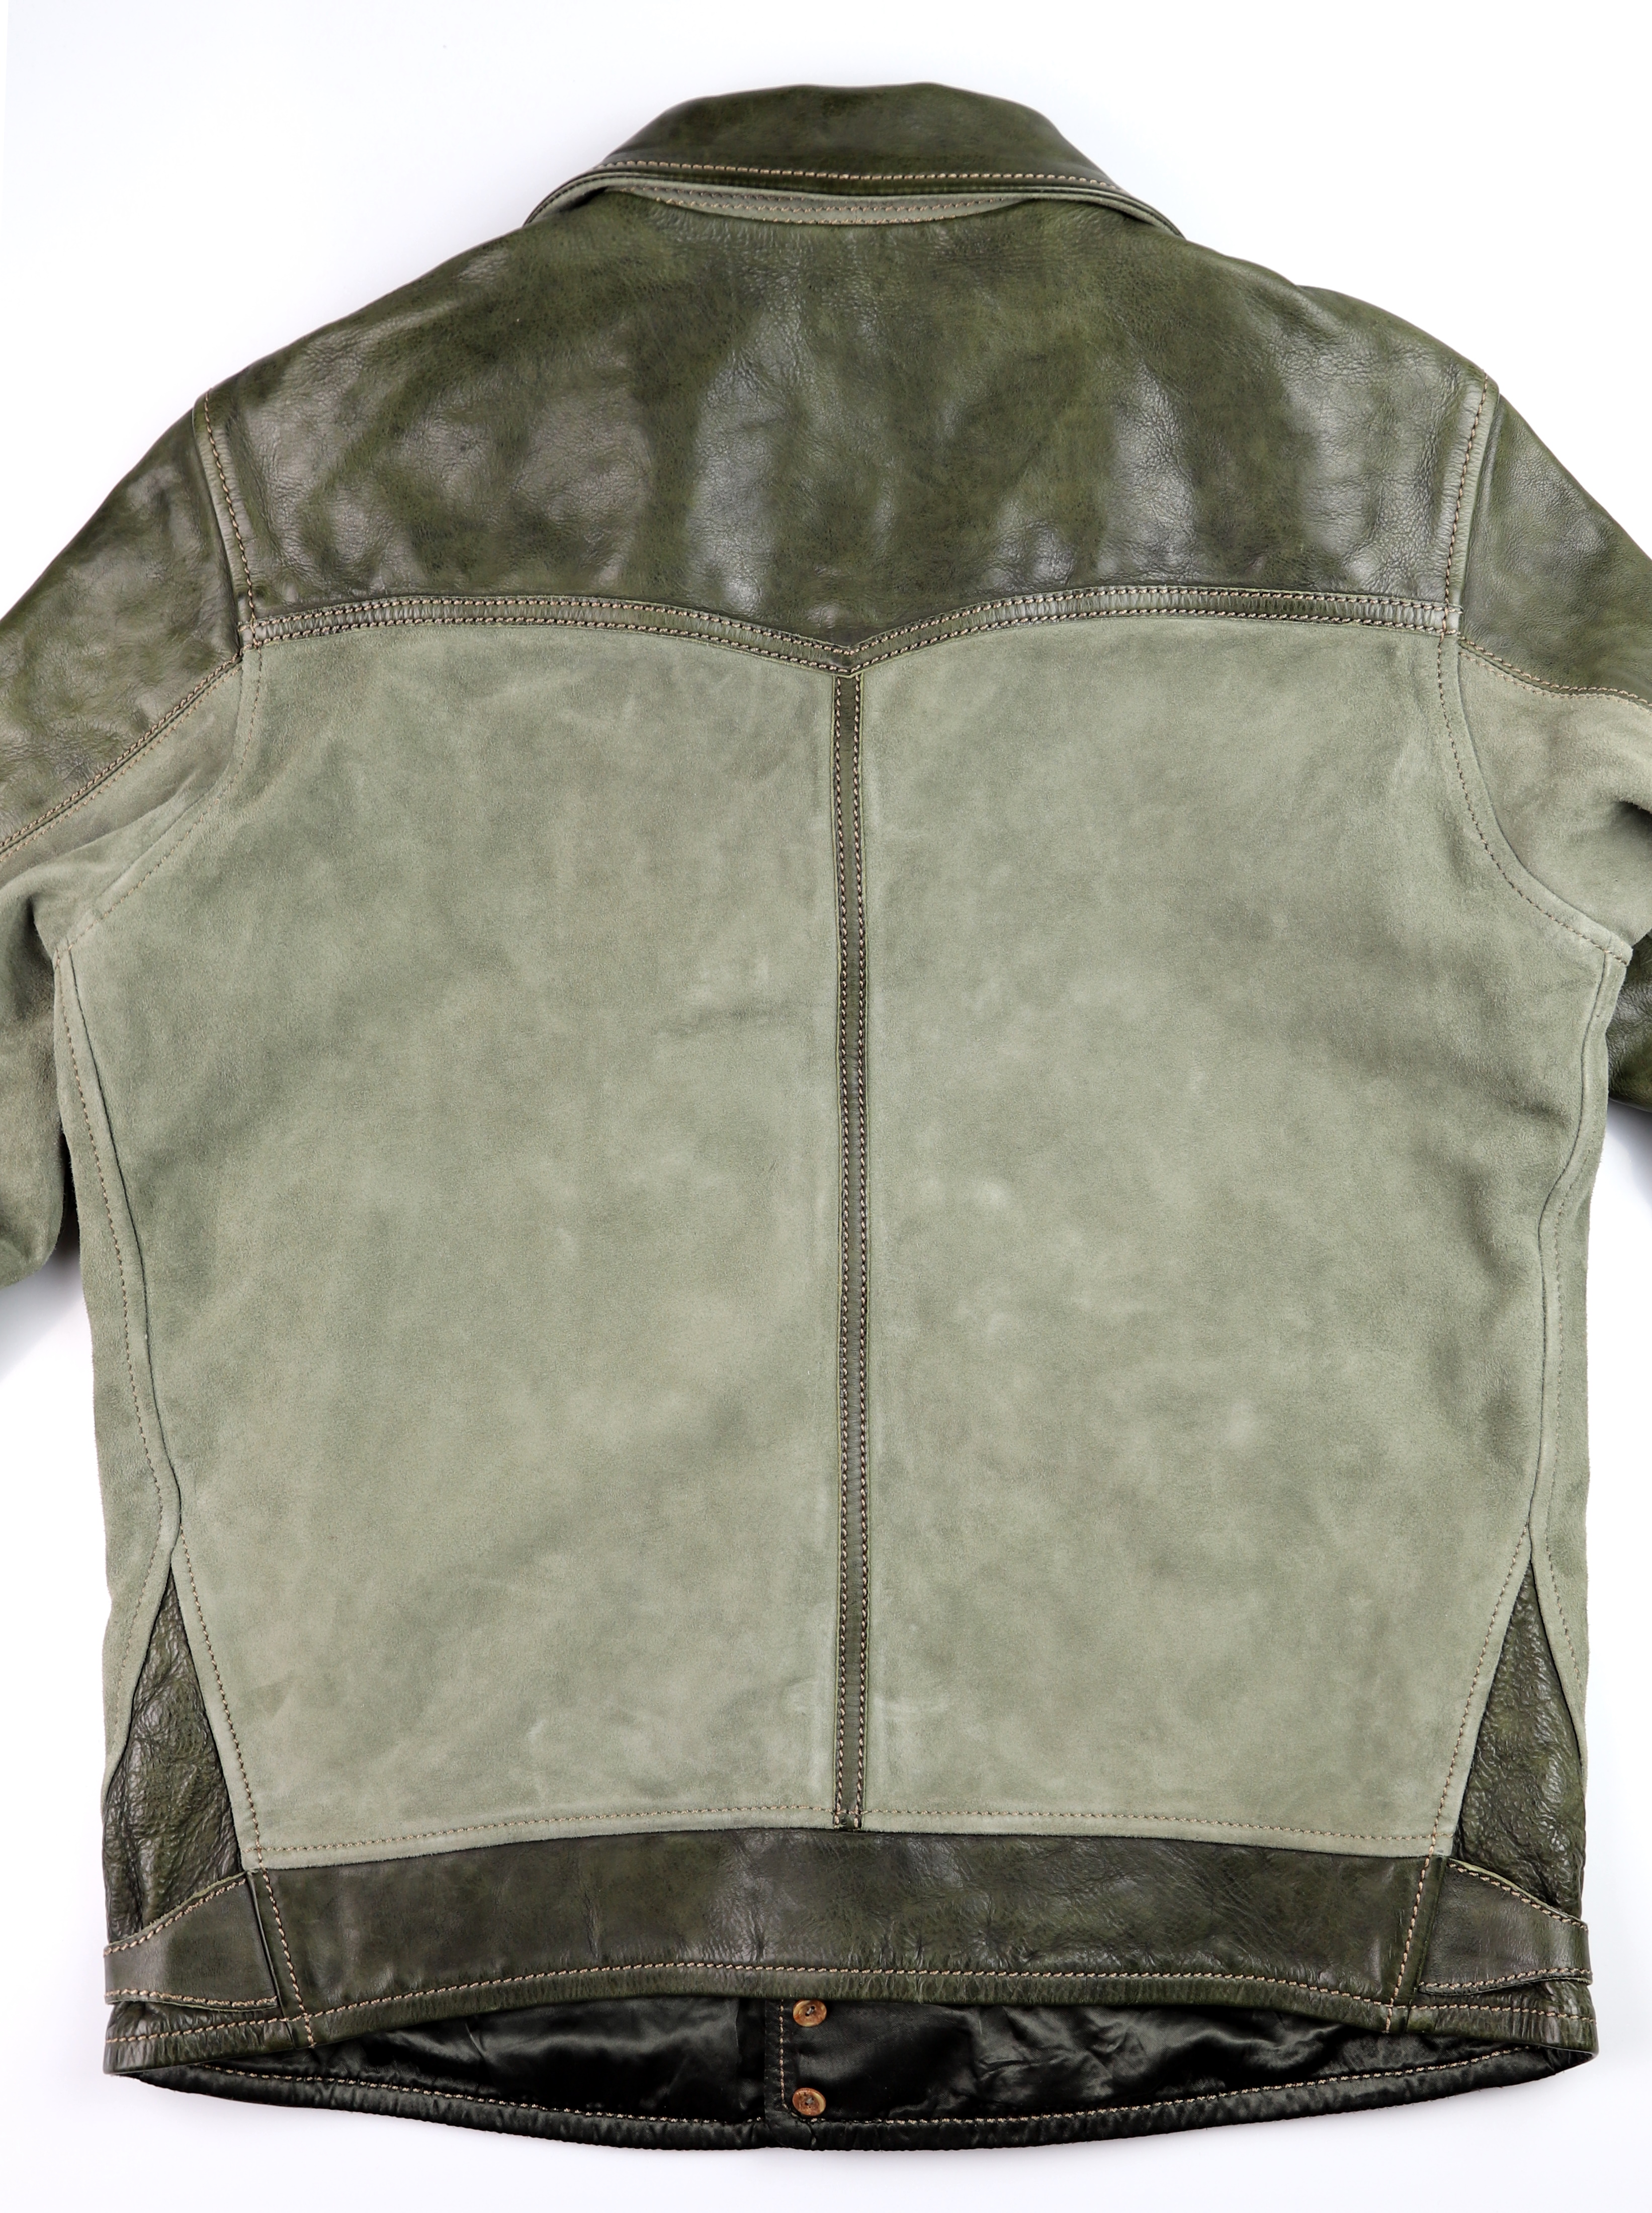 Thedi Niko Button-Up Green Goat Suede + Cowhide THNB1 back.jpg